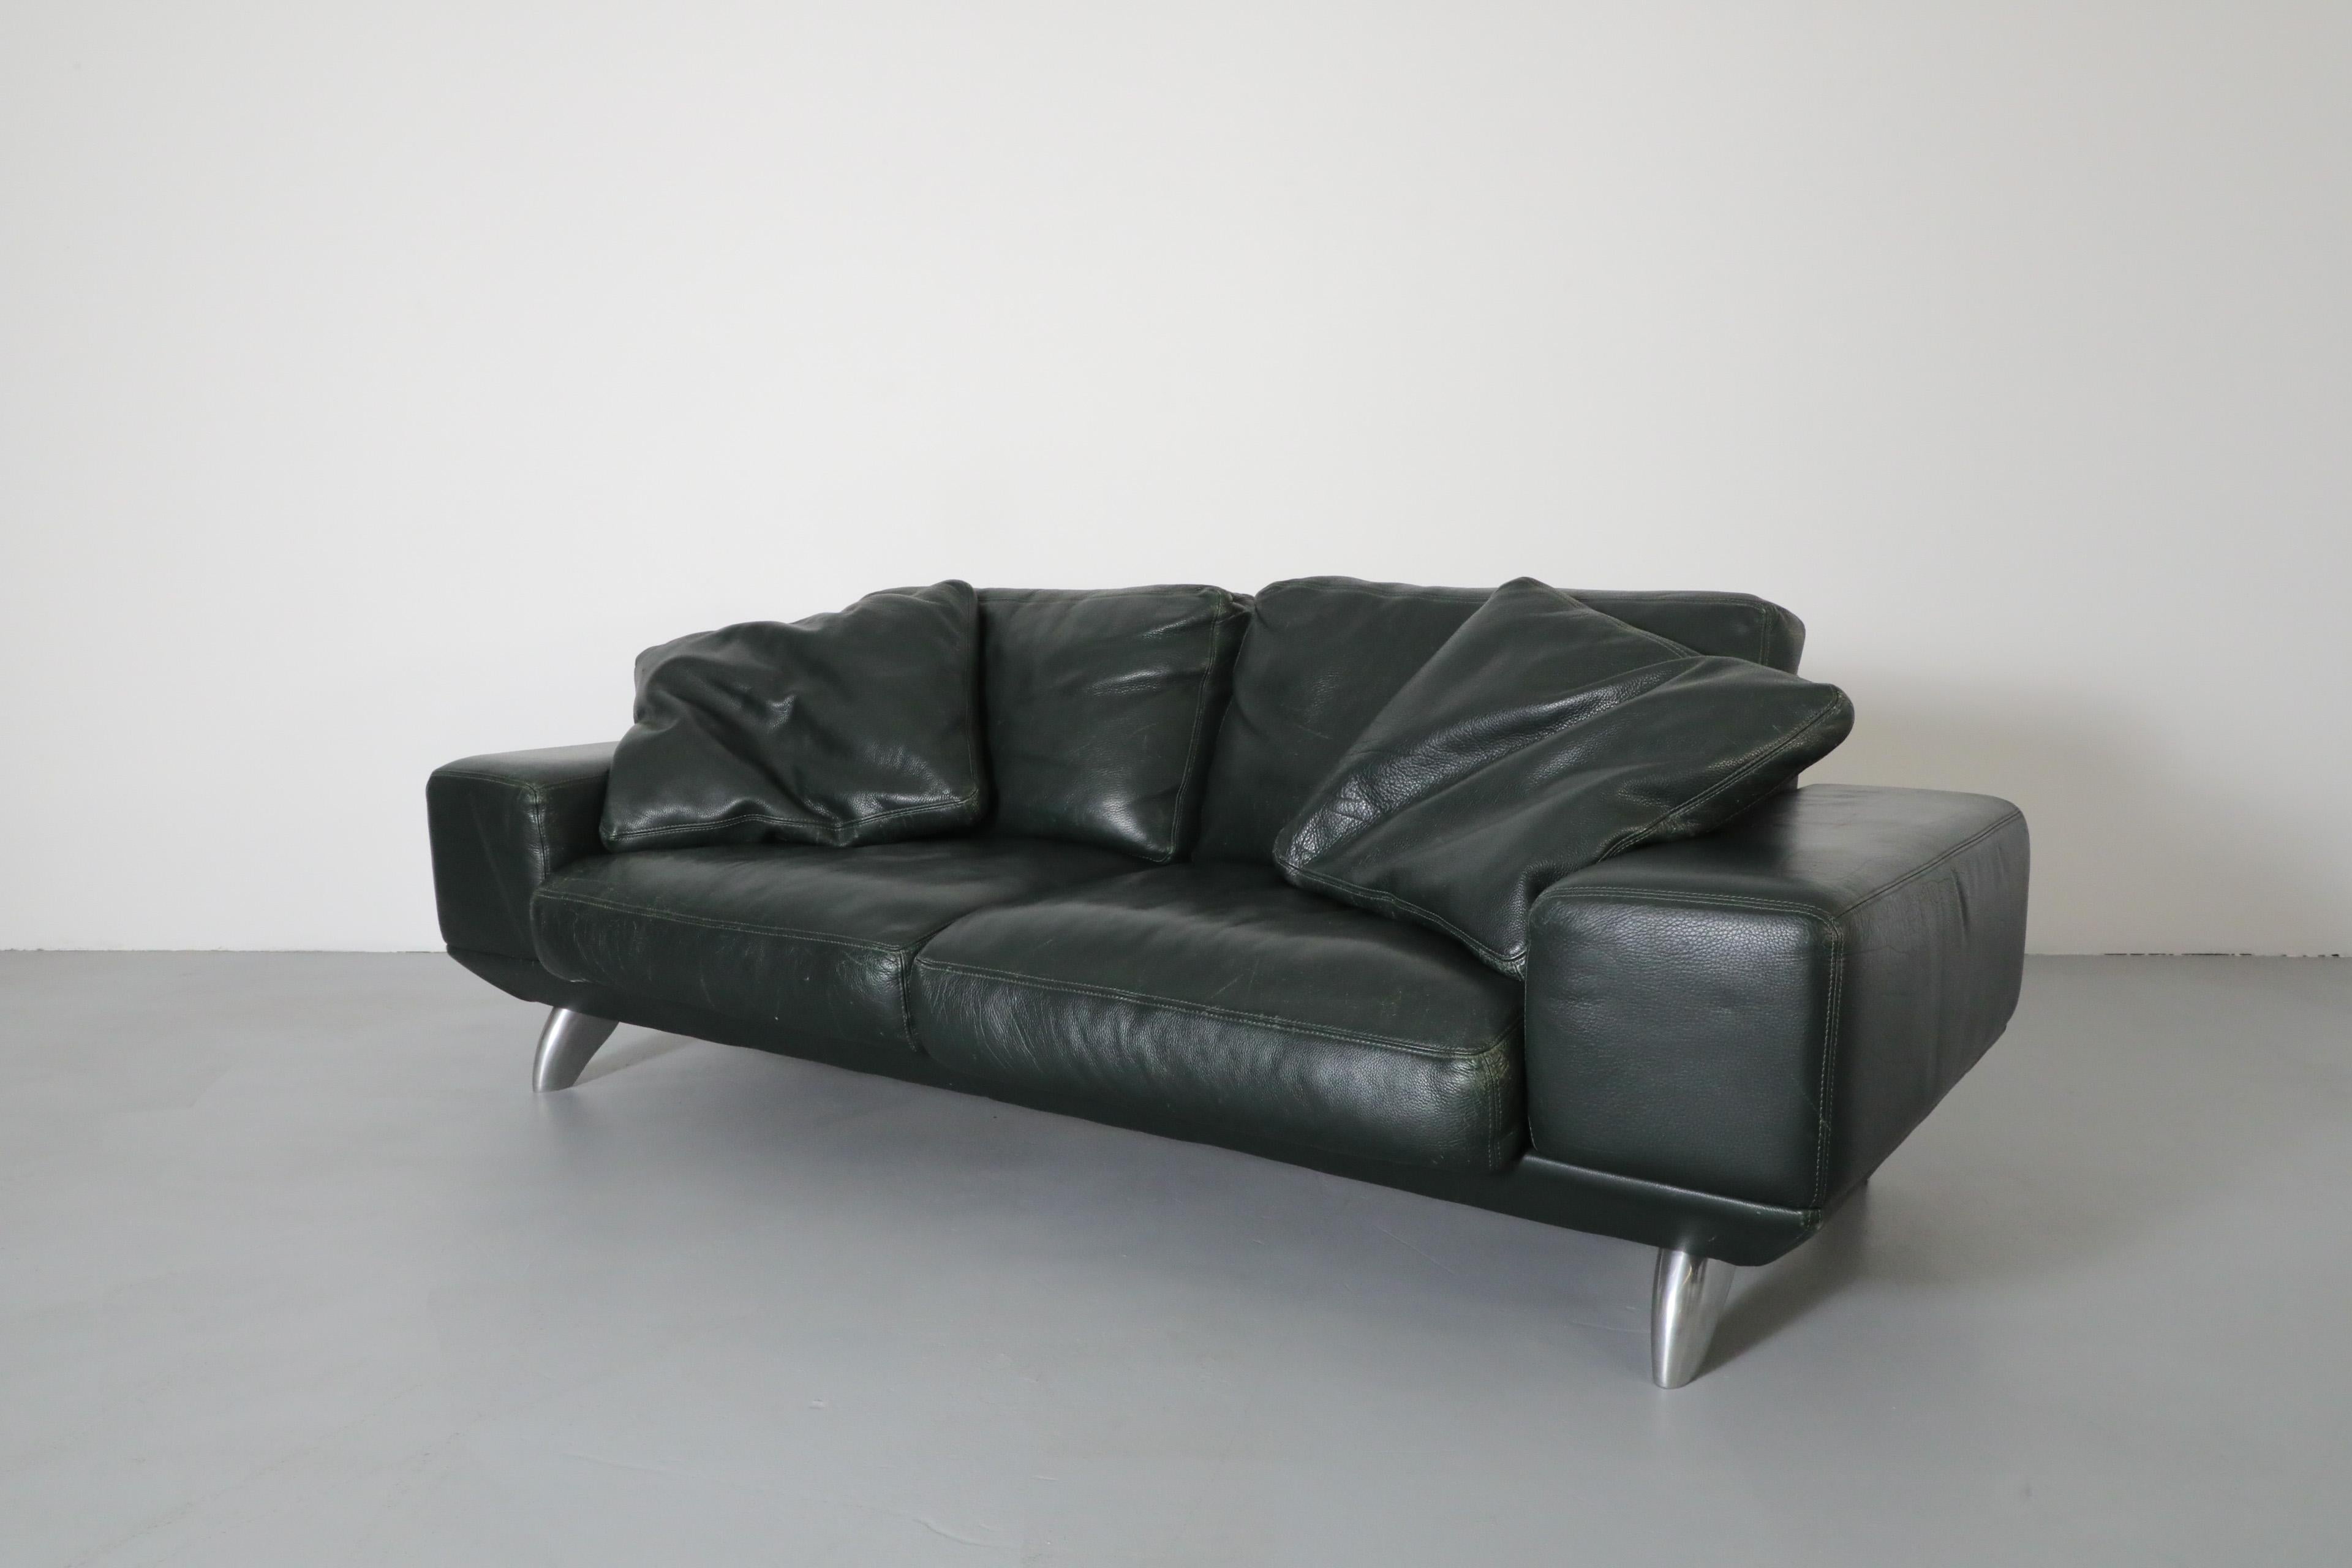 Mid-Century Modern Handsome 80's Dark Green Leather Sofa by Molinari w/ Wide Arms & Metal Legs For Sale